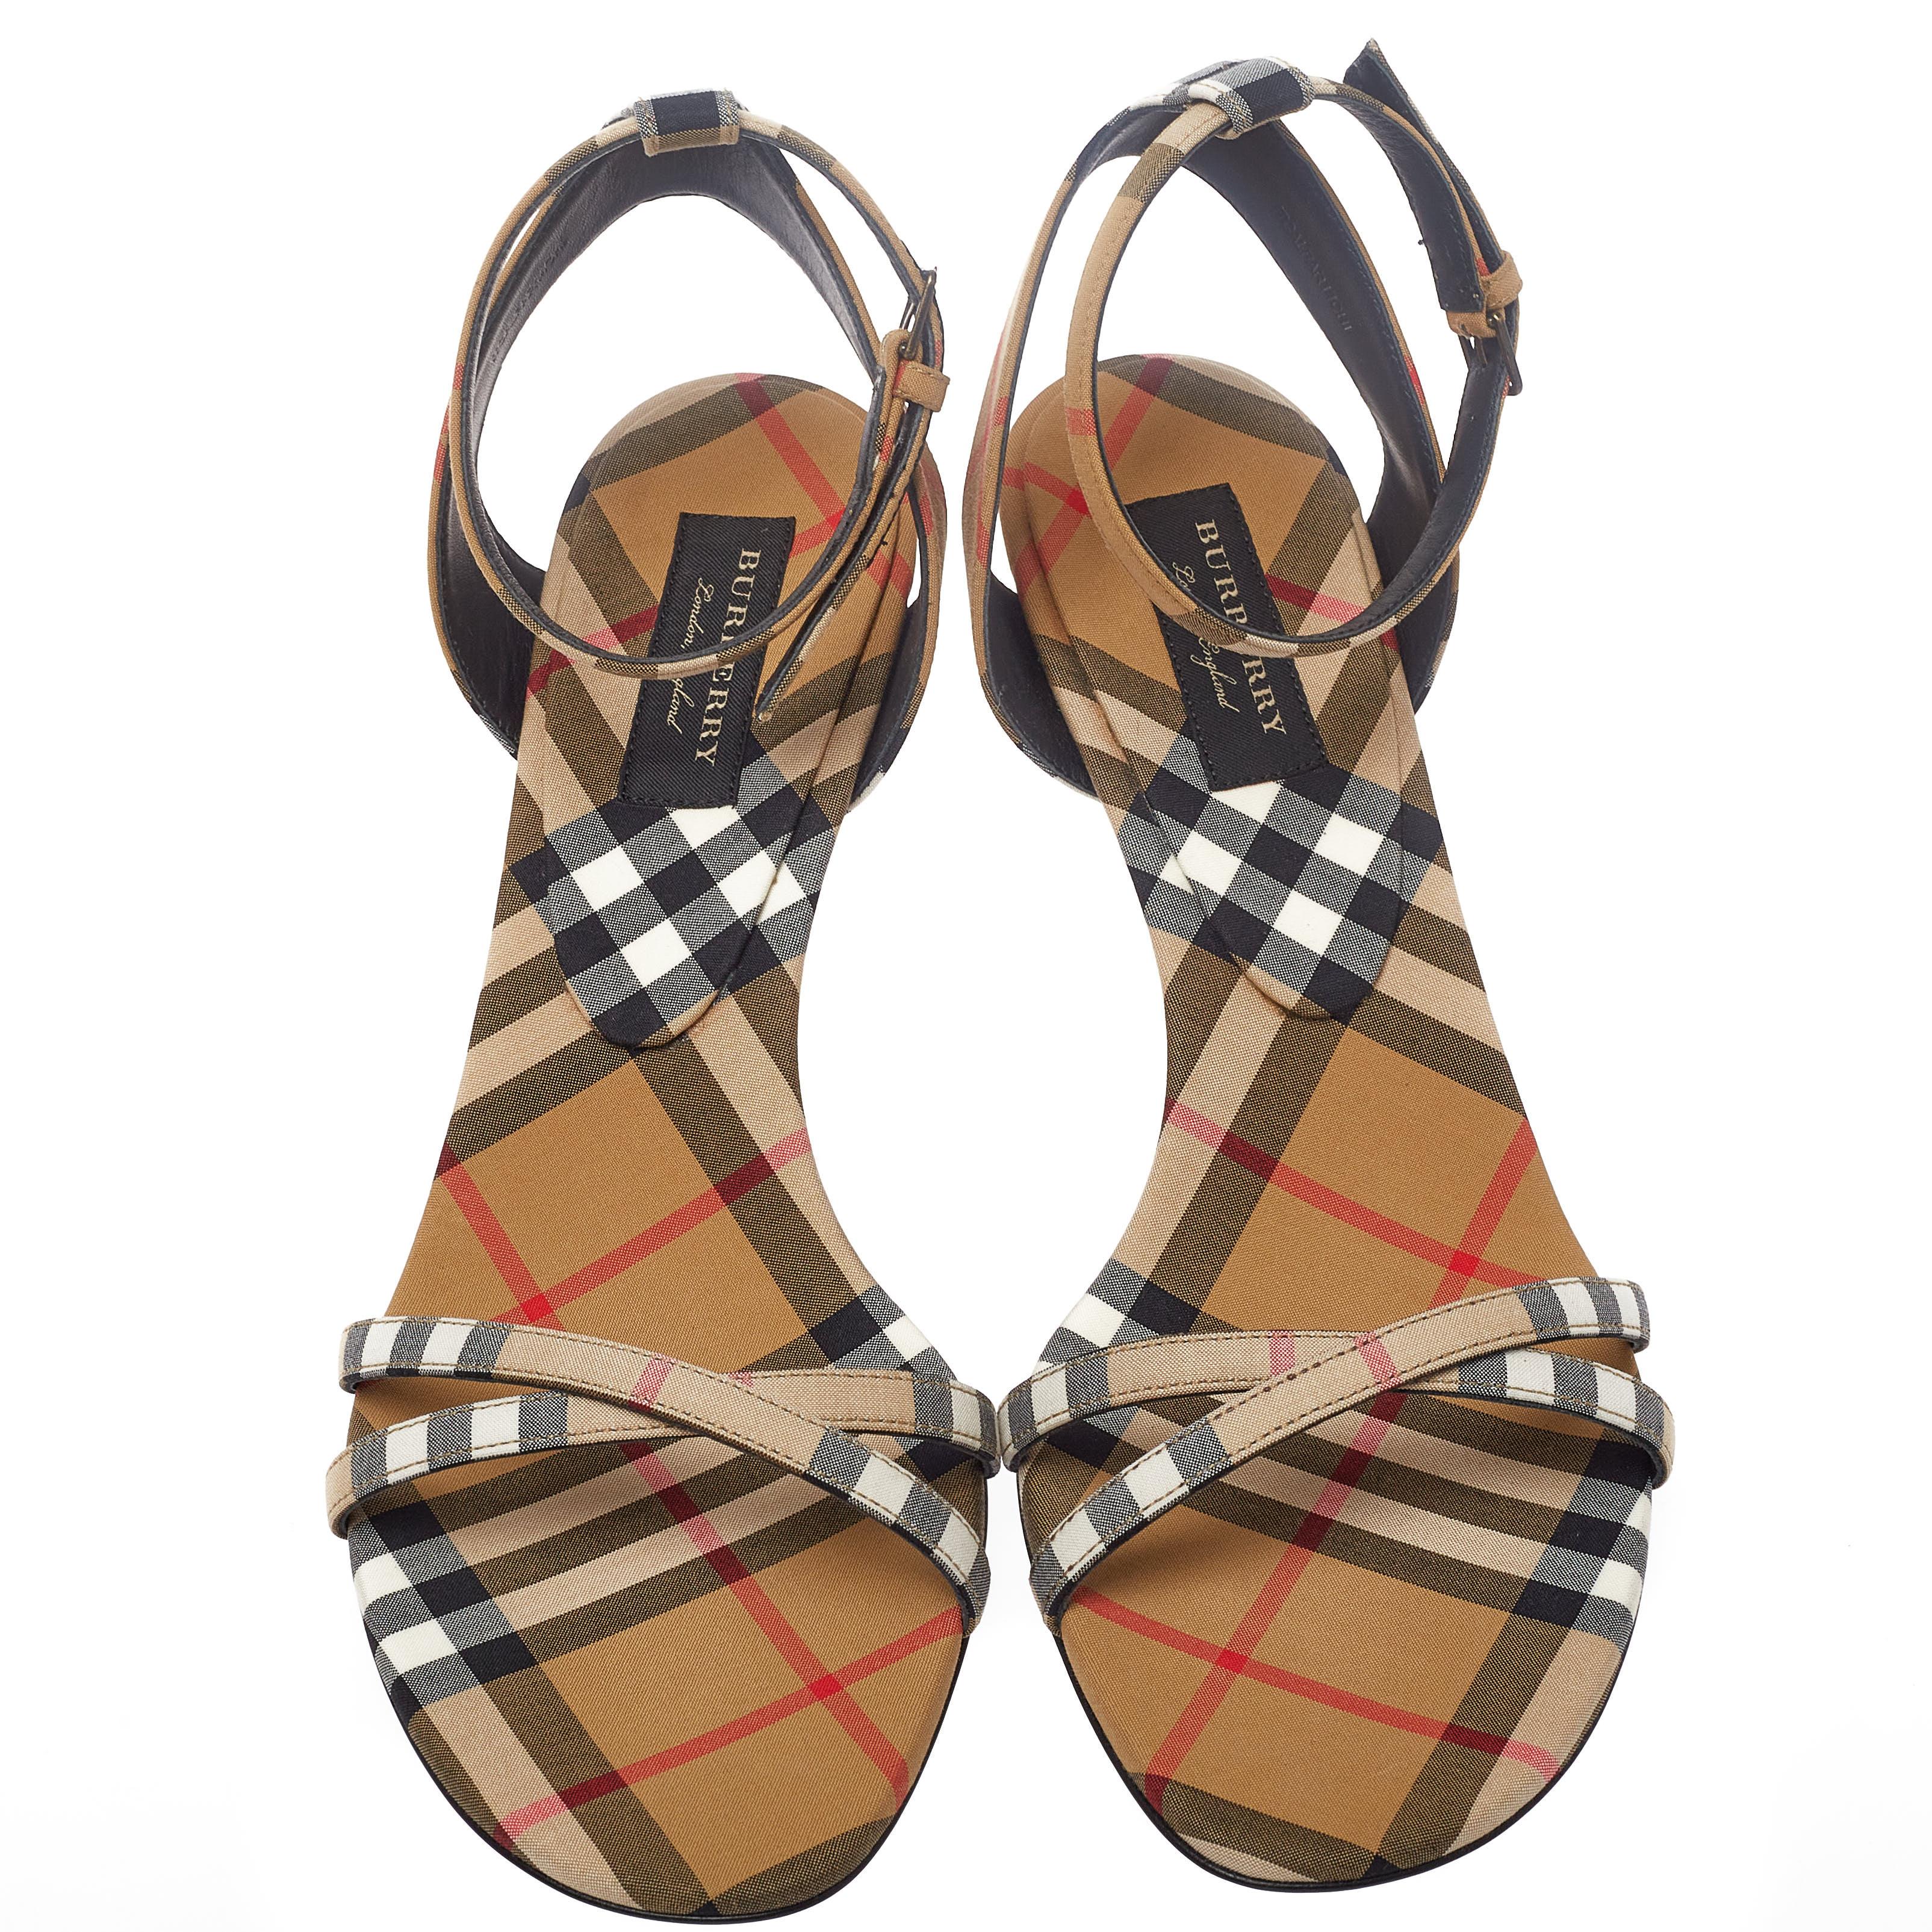 Beautiful and stylish, these stunning beige Hansel sandals from Burberry are worth the splurge! They are crafted from the brand's signature Novacheck fabric and feature an open toe design. They flaunt crisscross vamp straps, buckled ankle straps,